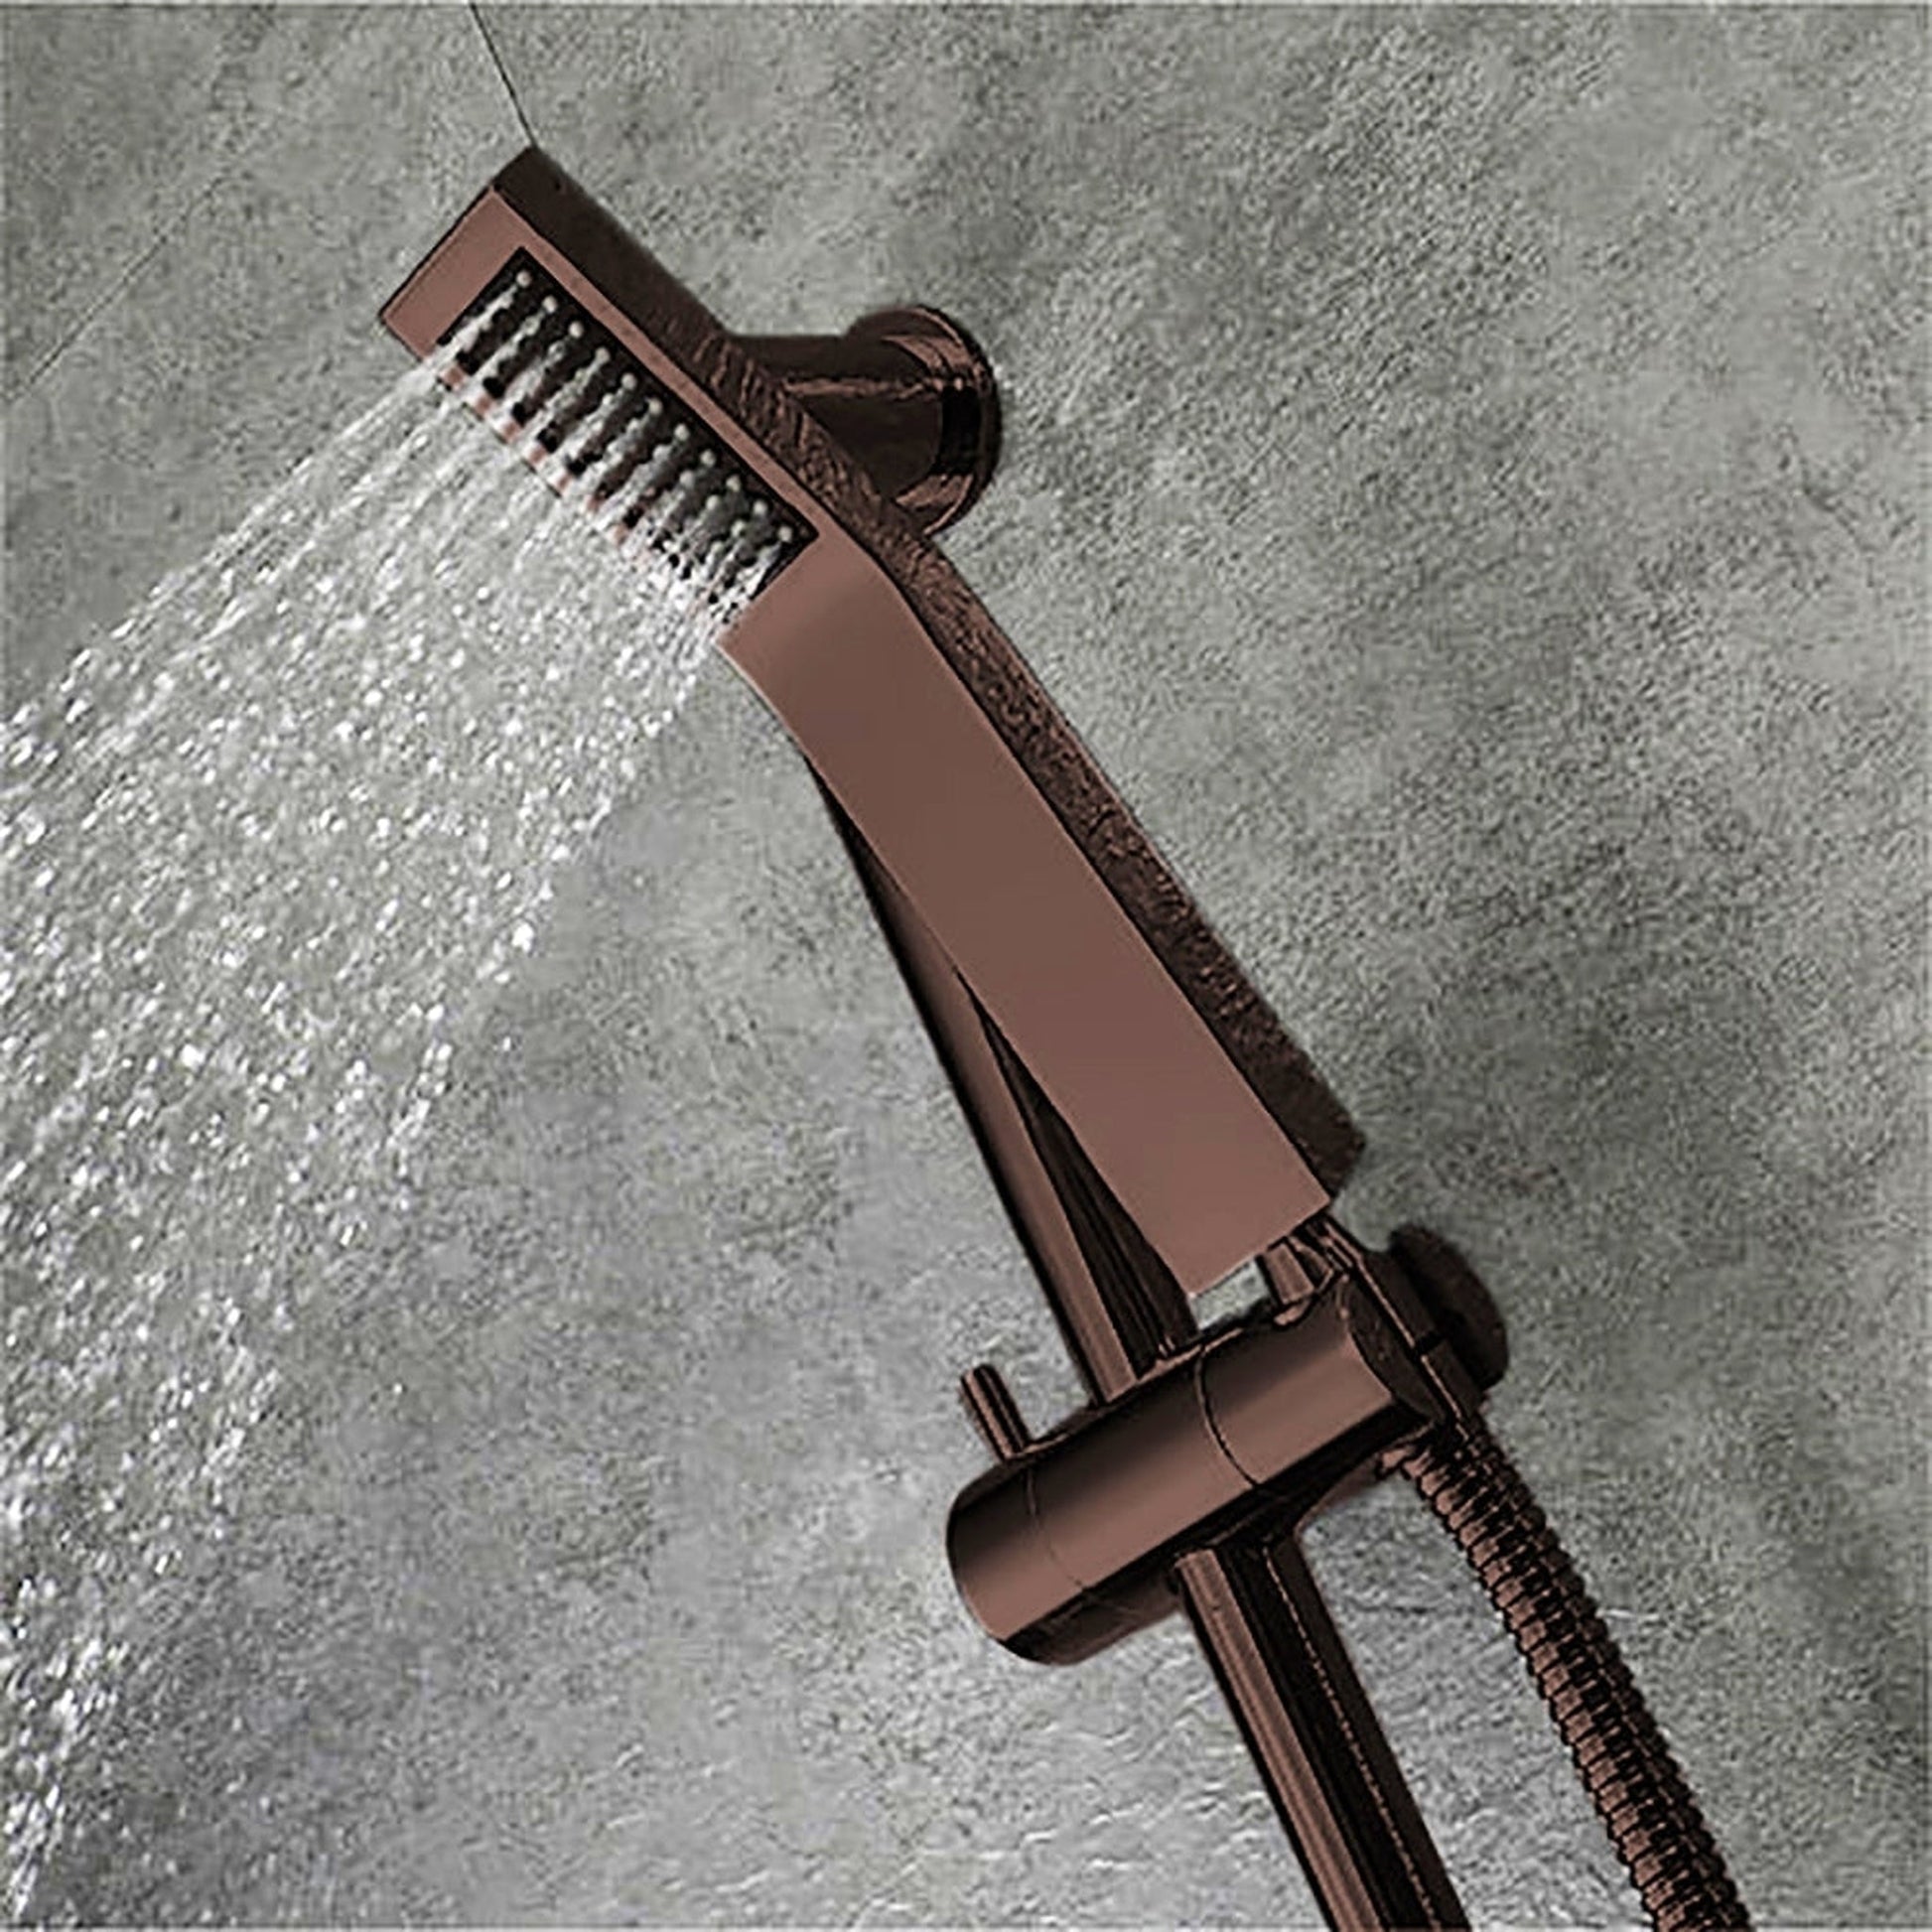 Luxury Oil Rubbed Bronze Shower System